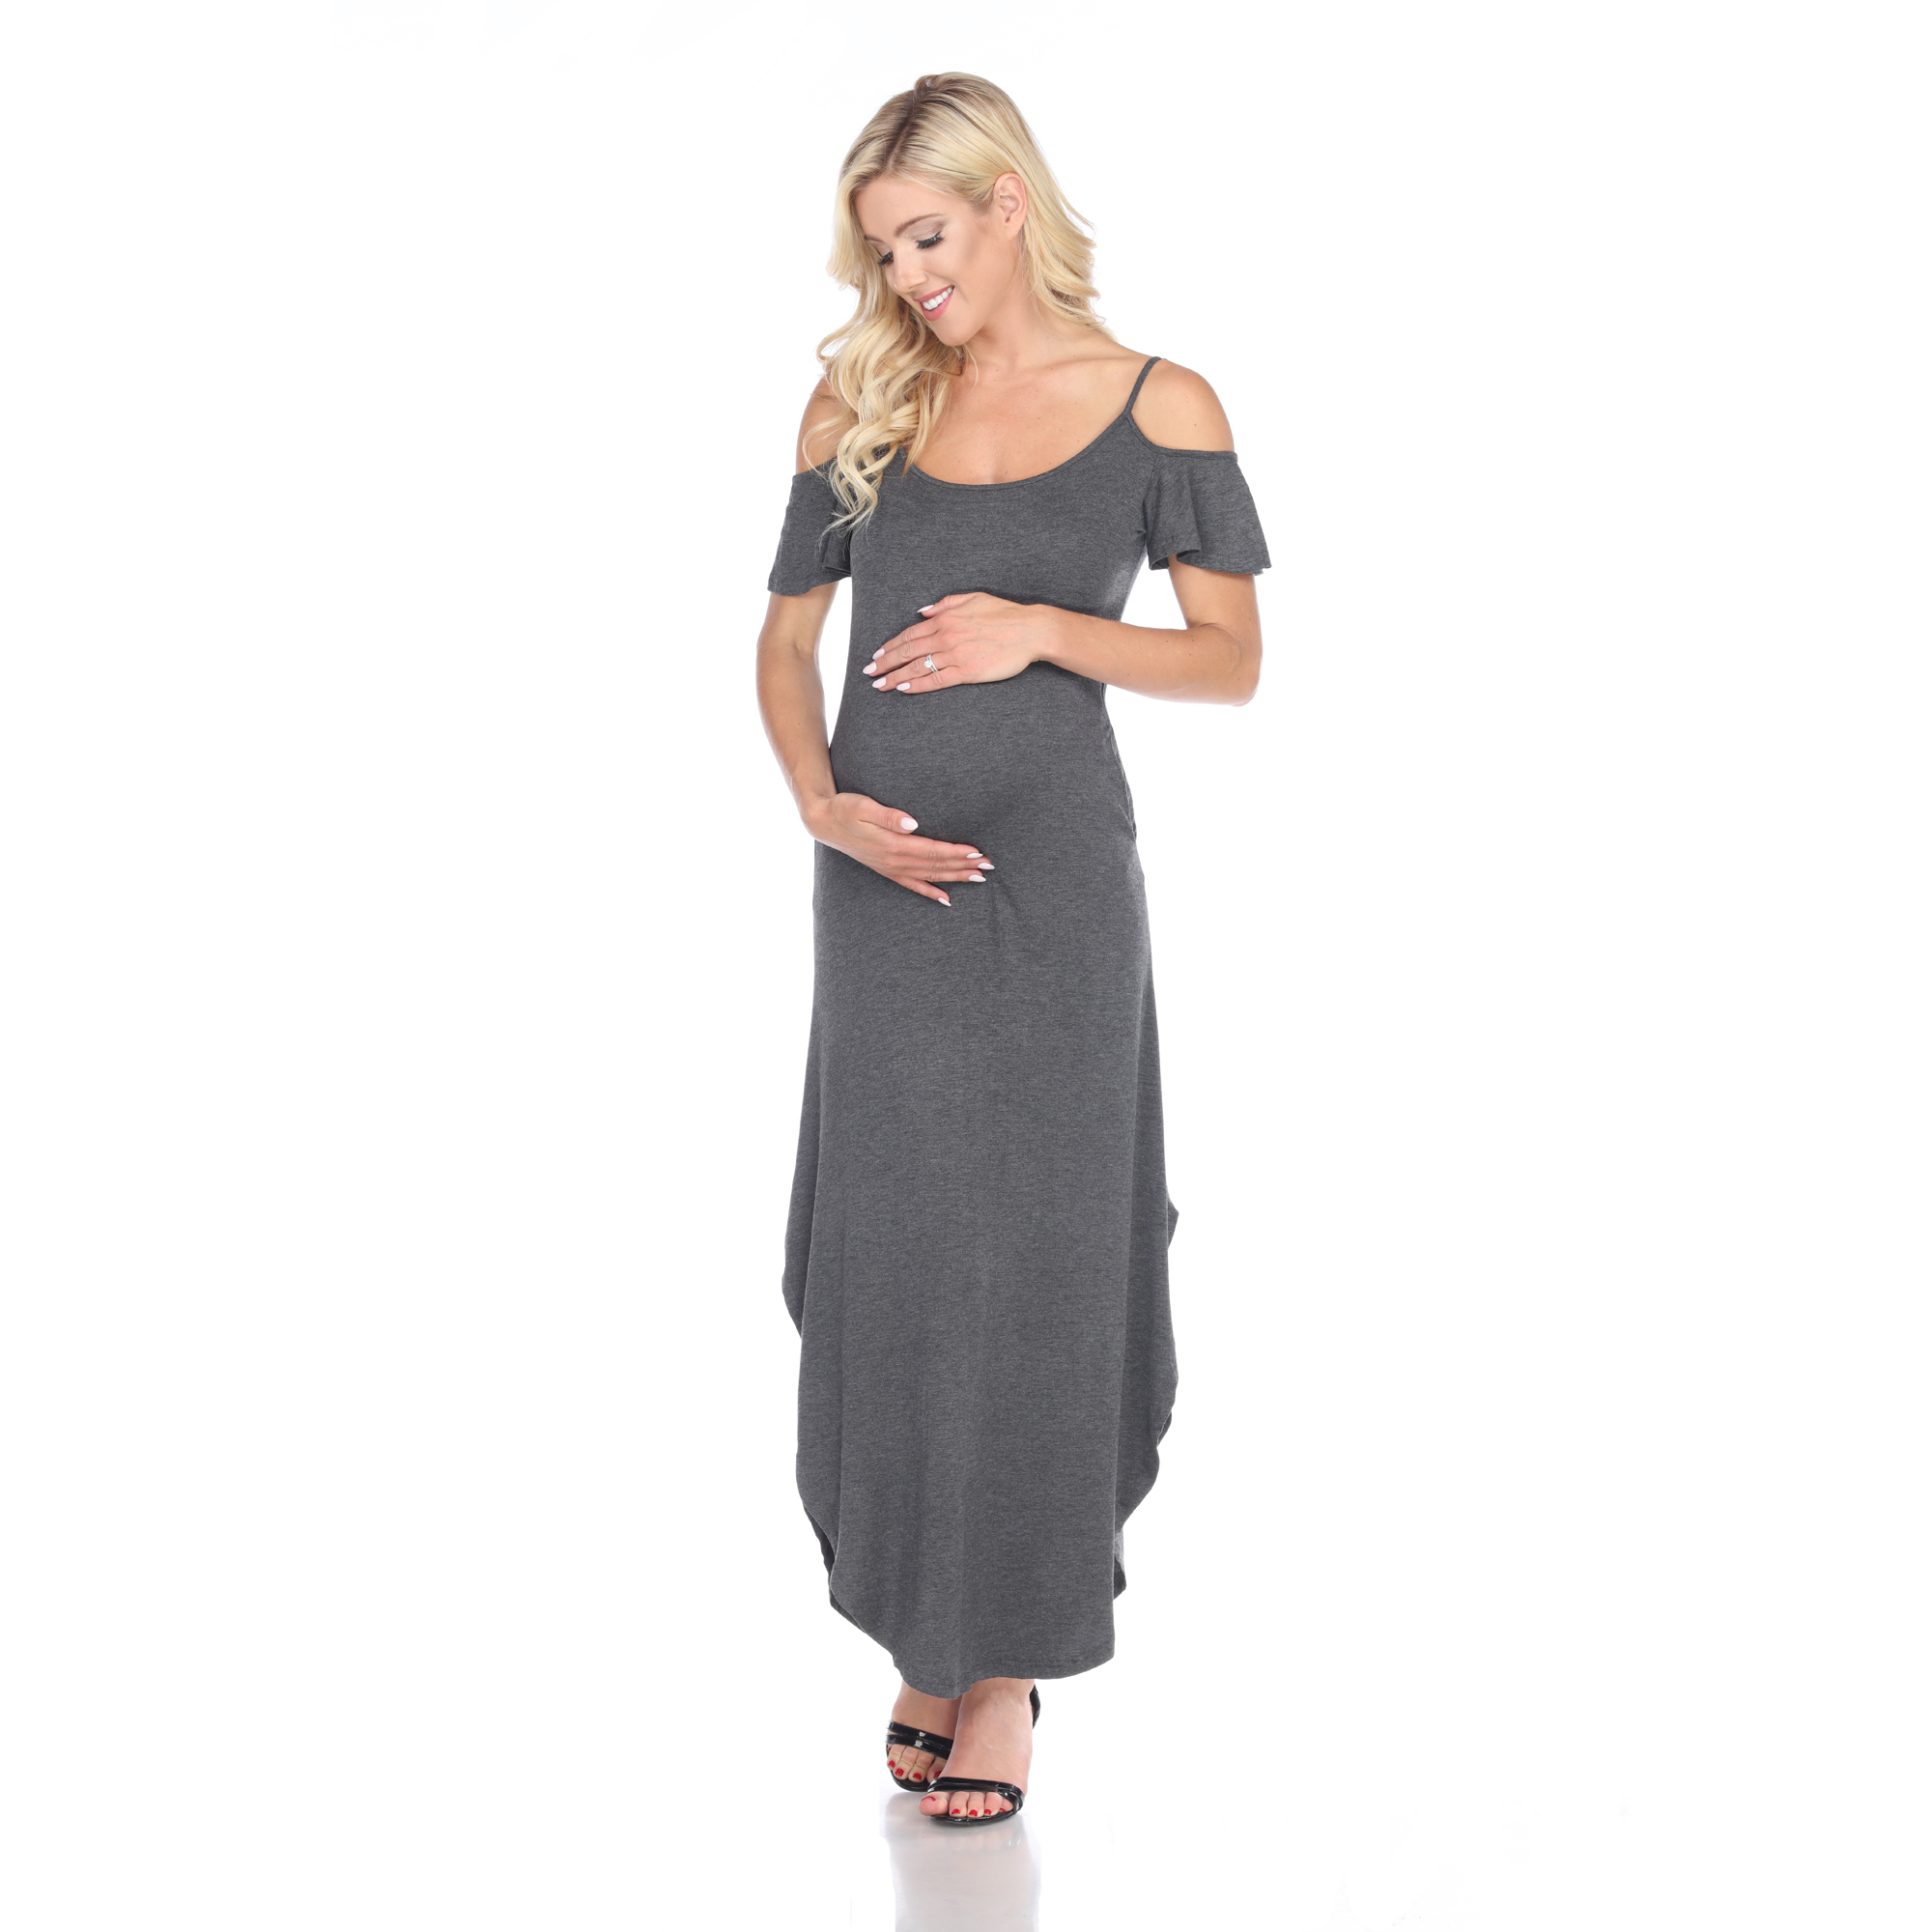 White Mark Women's Maternity Cold Shoulder Maxi Dress - Charcoal, Large